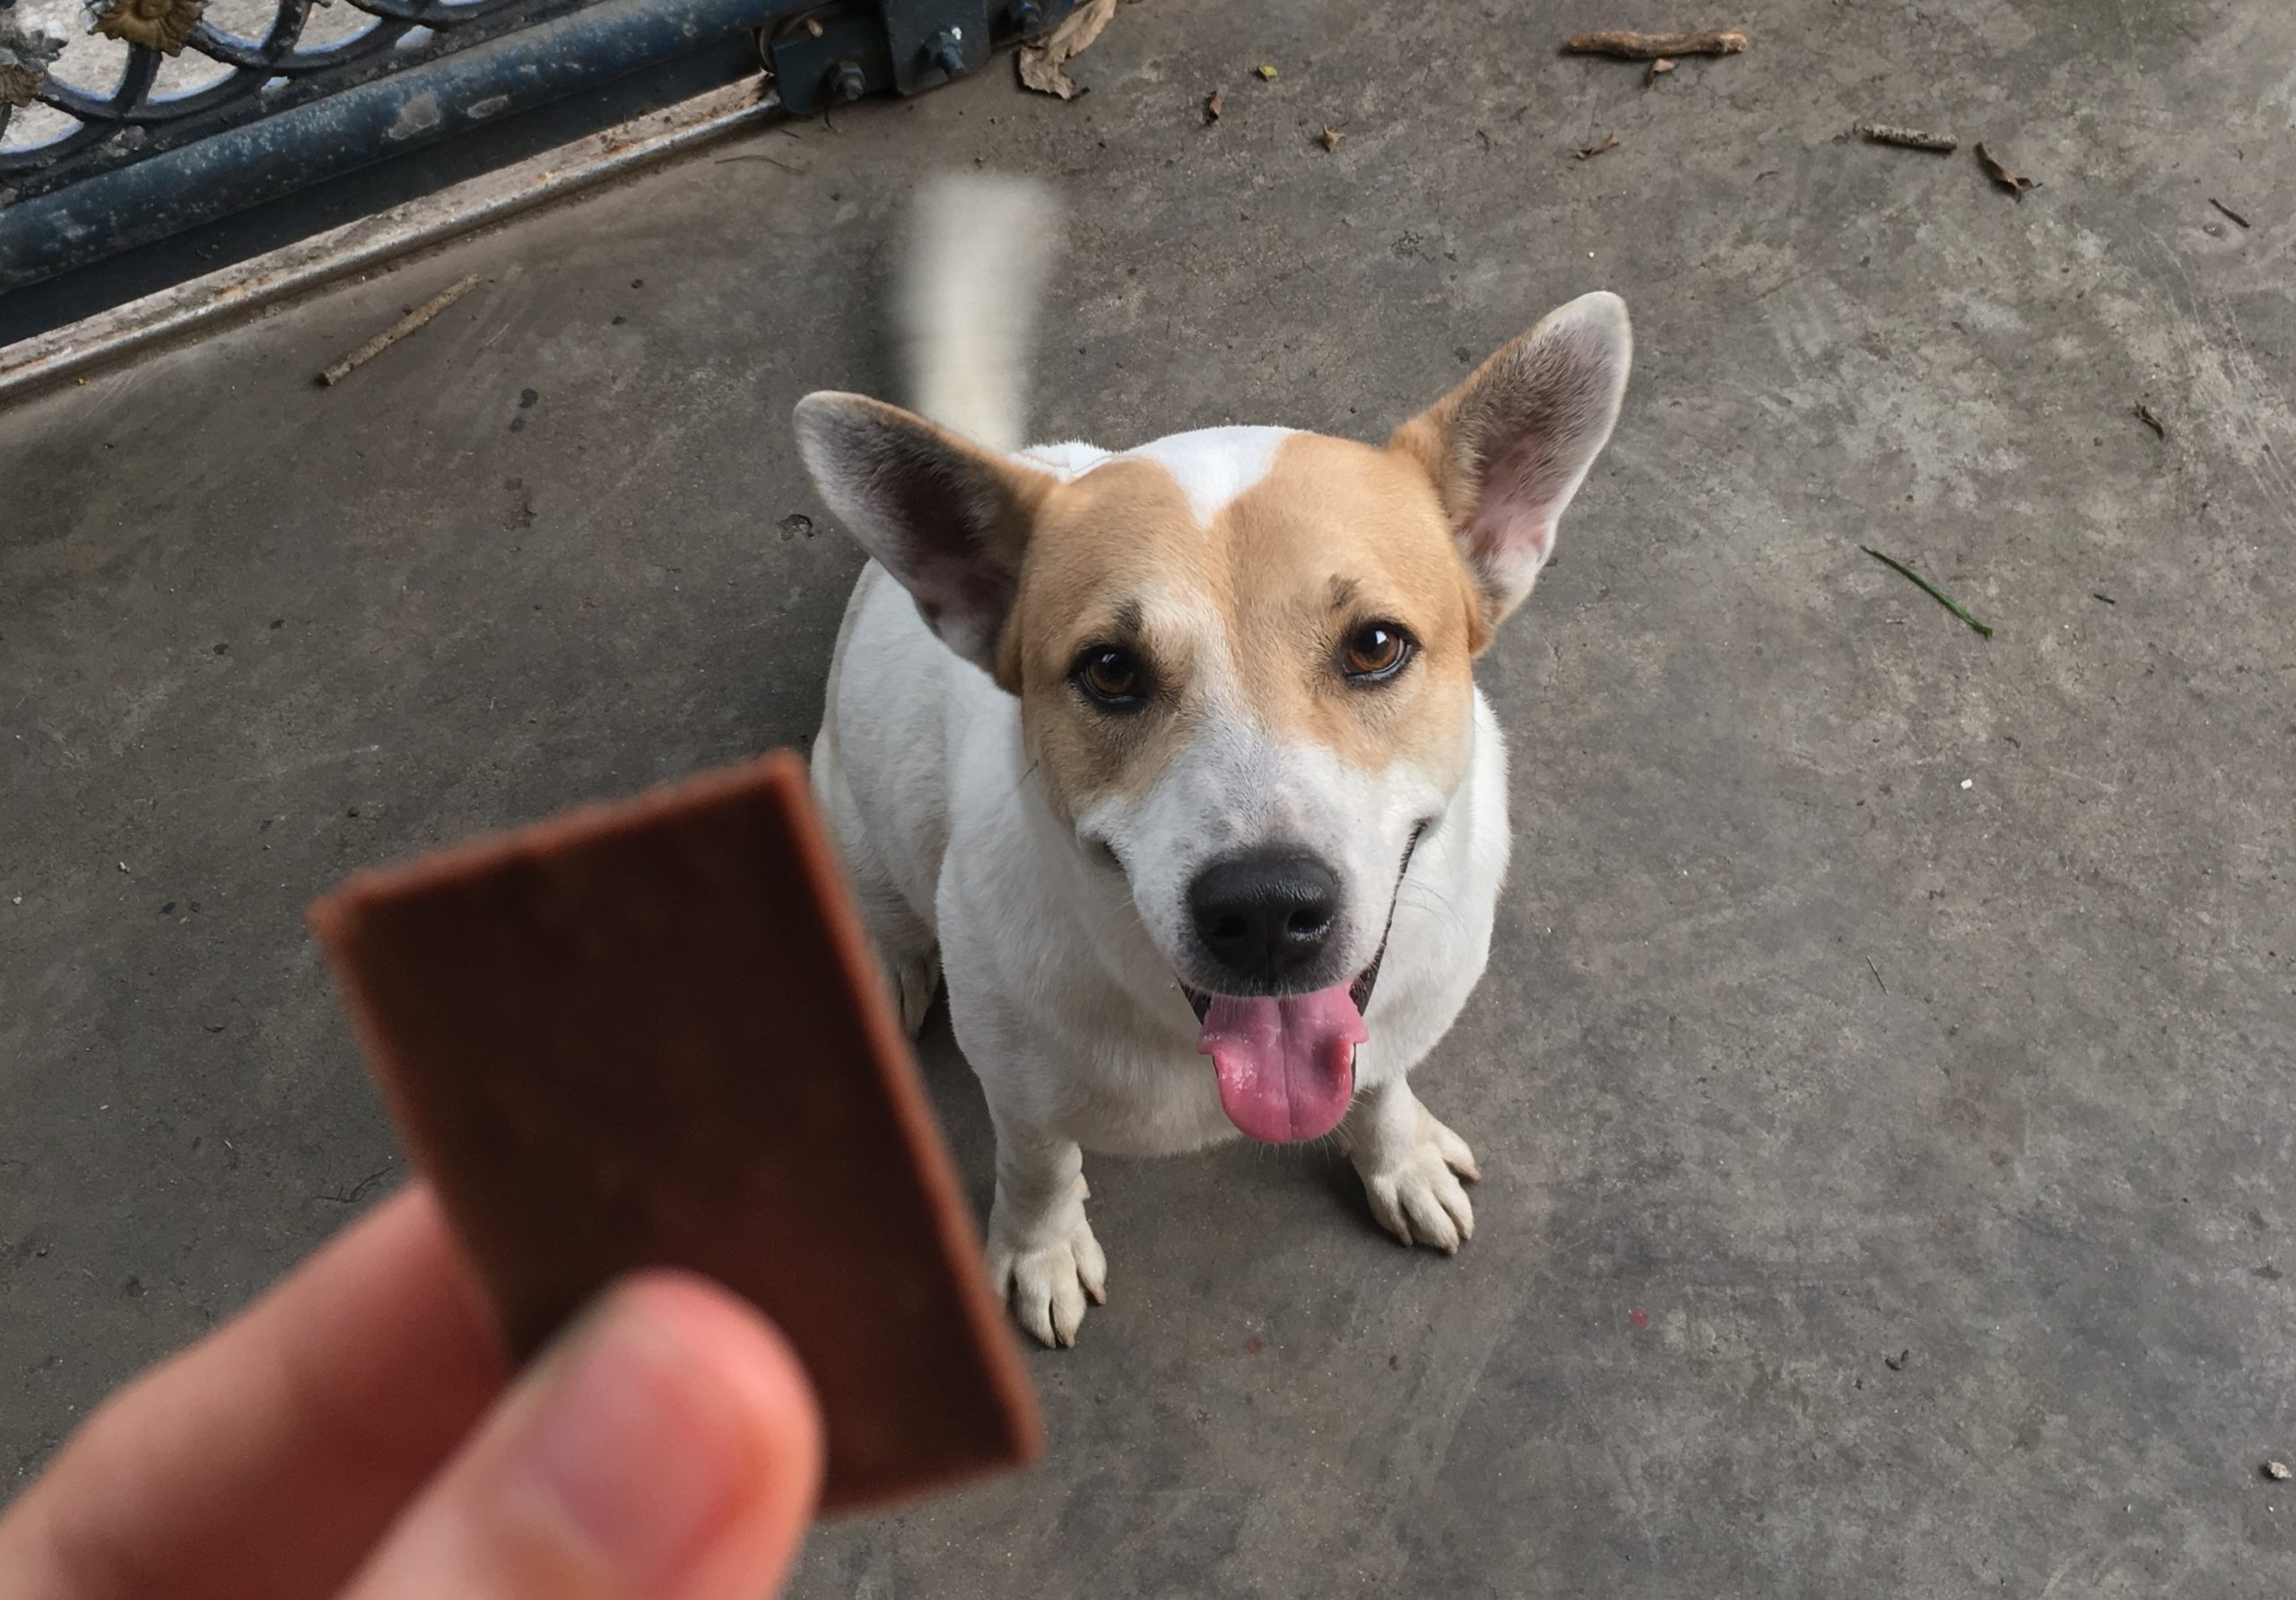 Is chocolate poisonous for dogs?